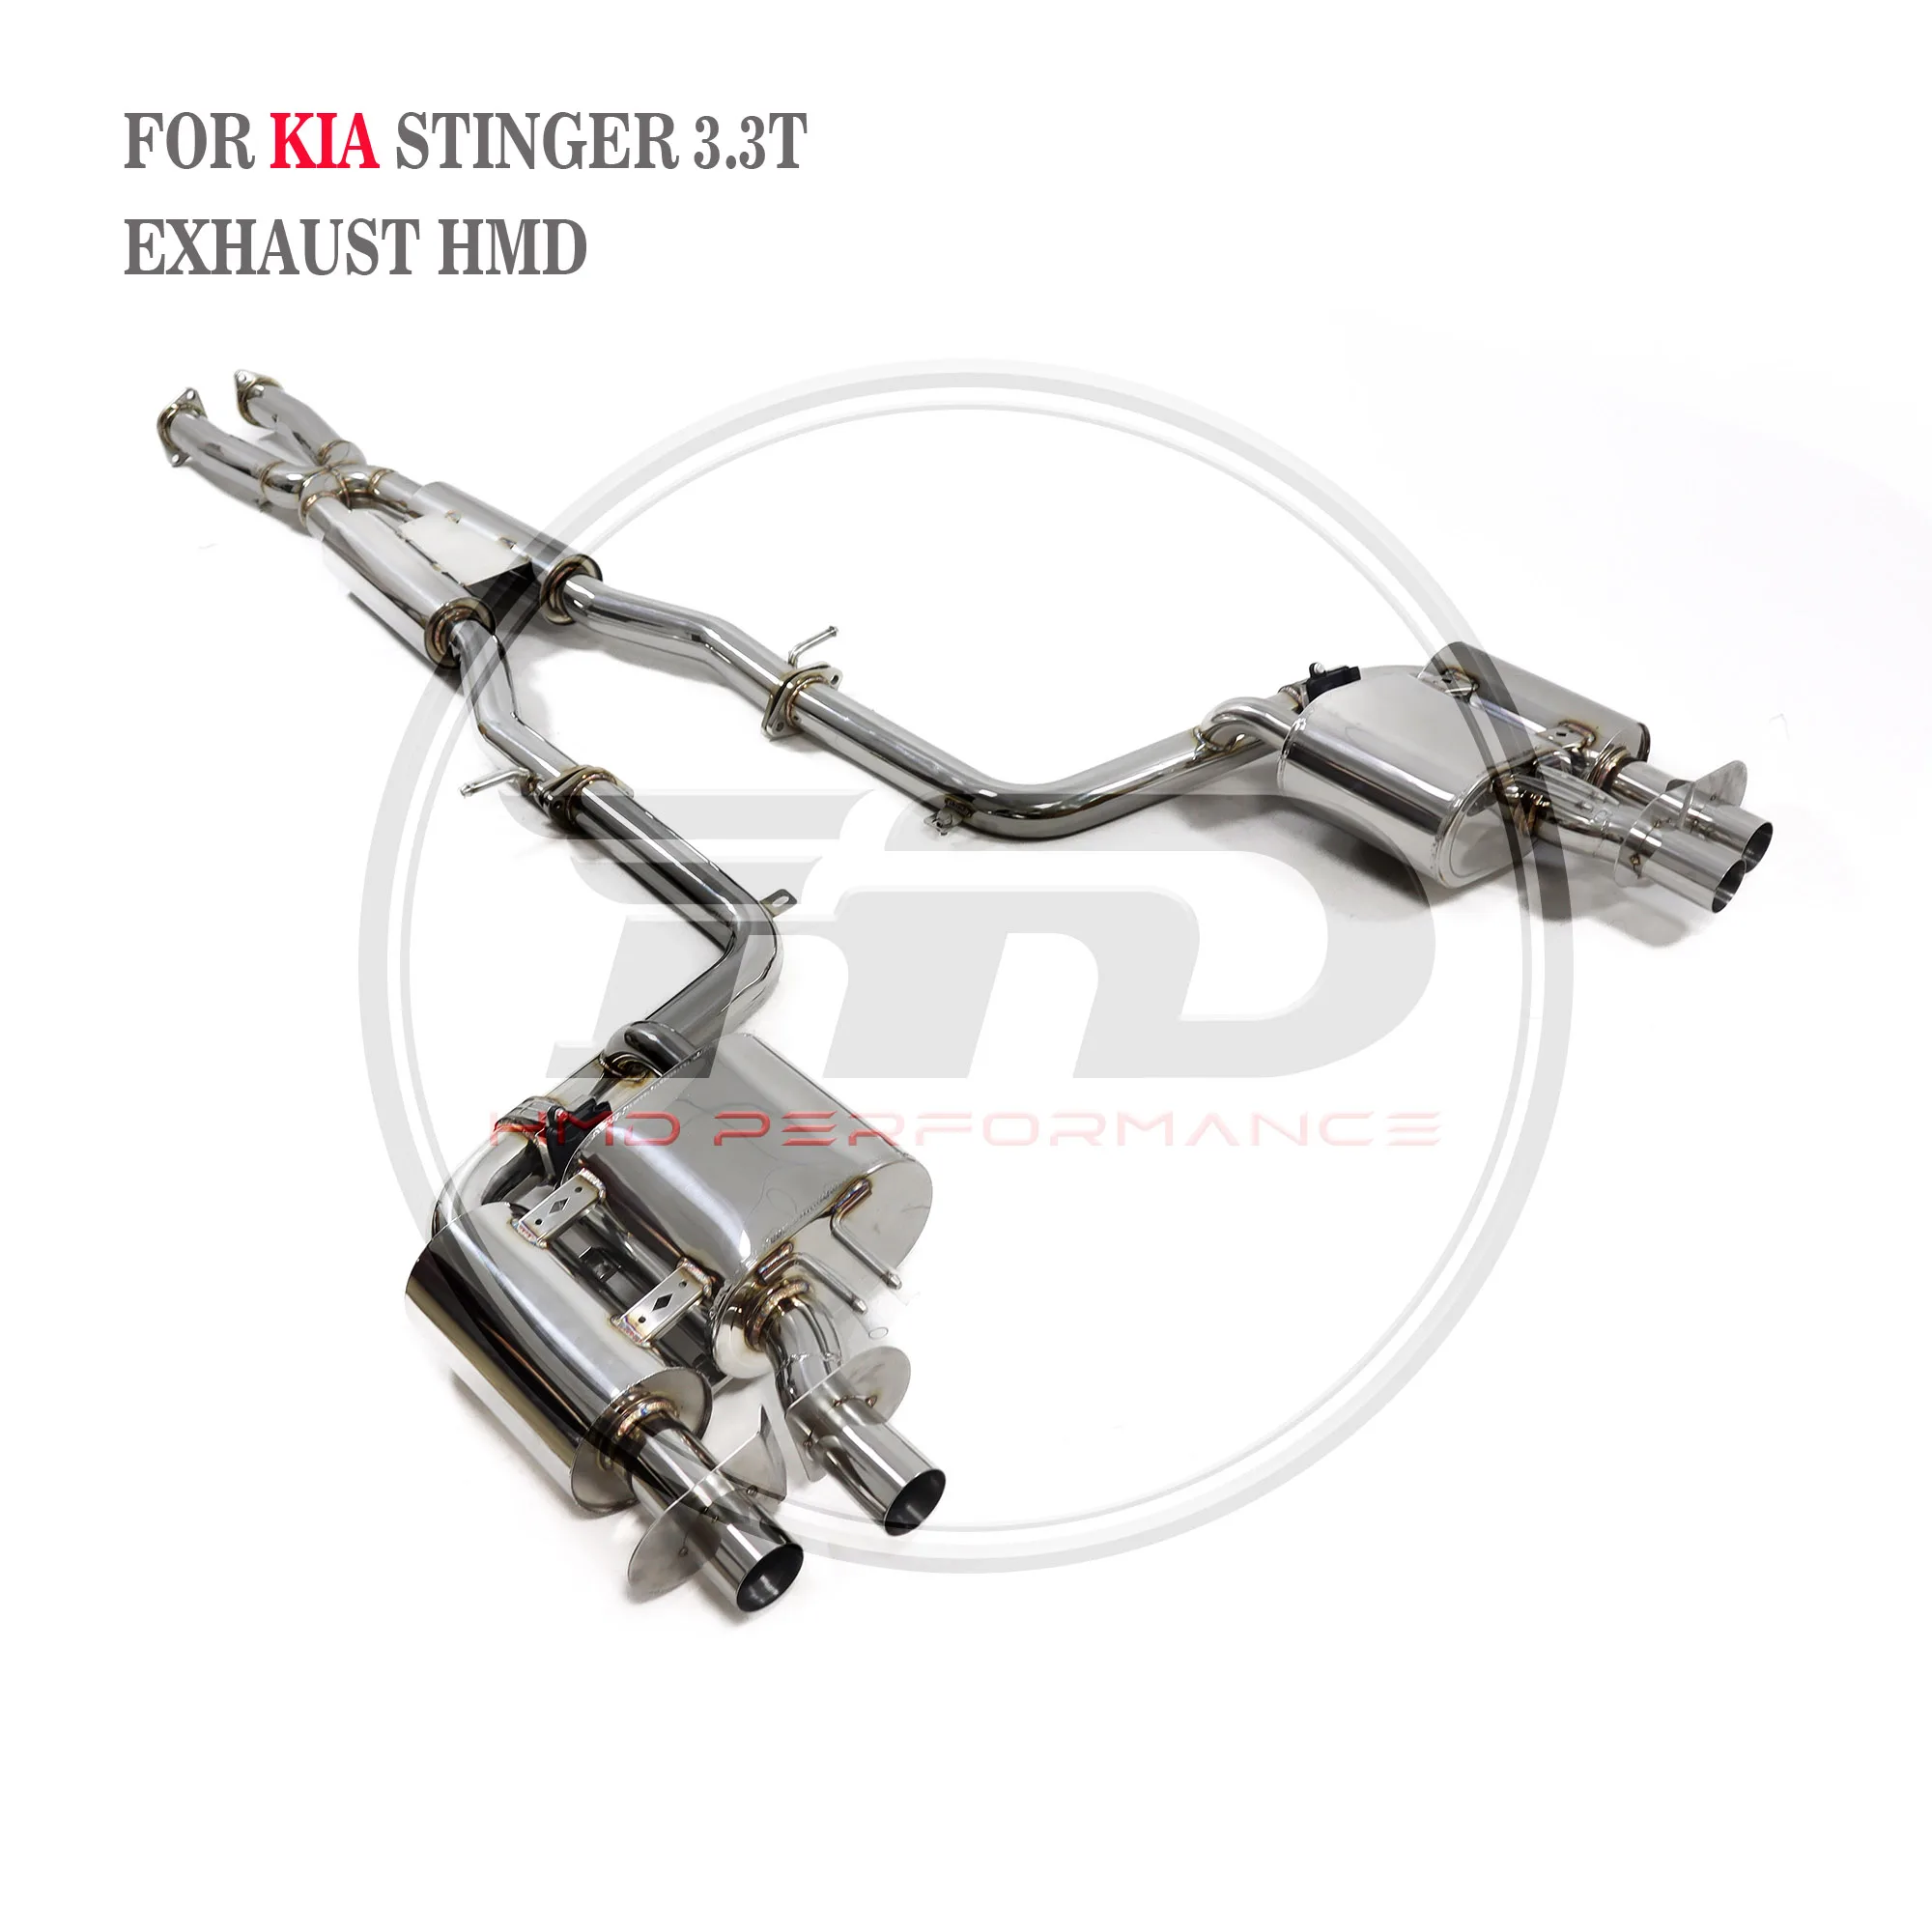 

HMD Stainless Steel Exhaust System Performance Catback For KIA Stinger GT 3.3T Muffler With Valve